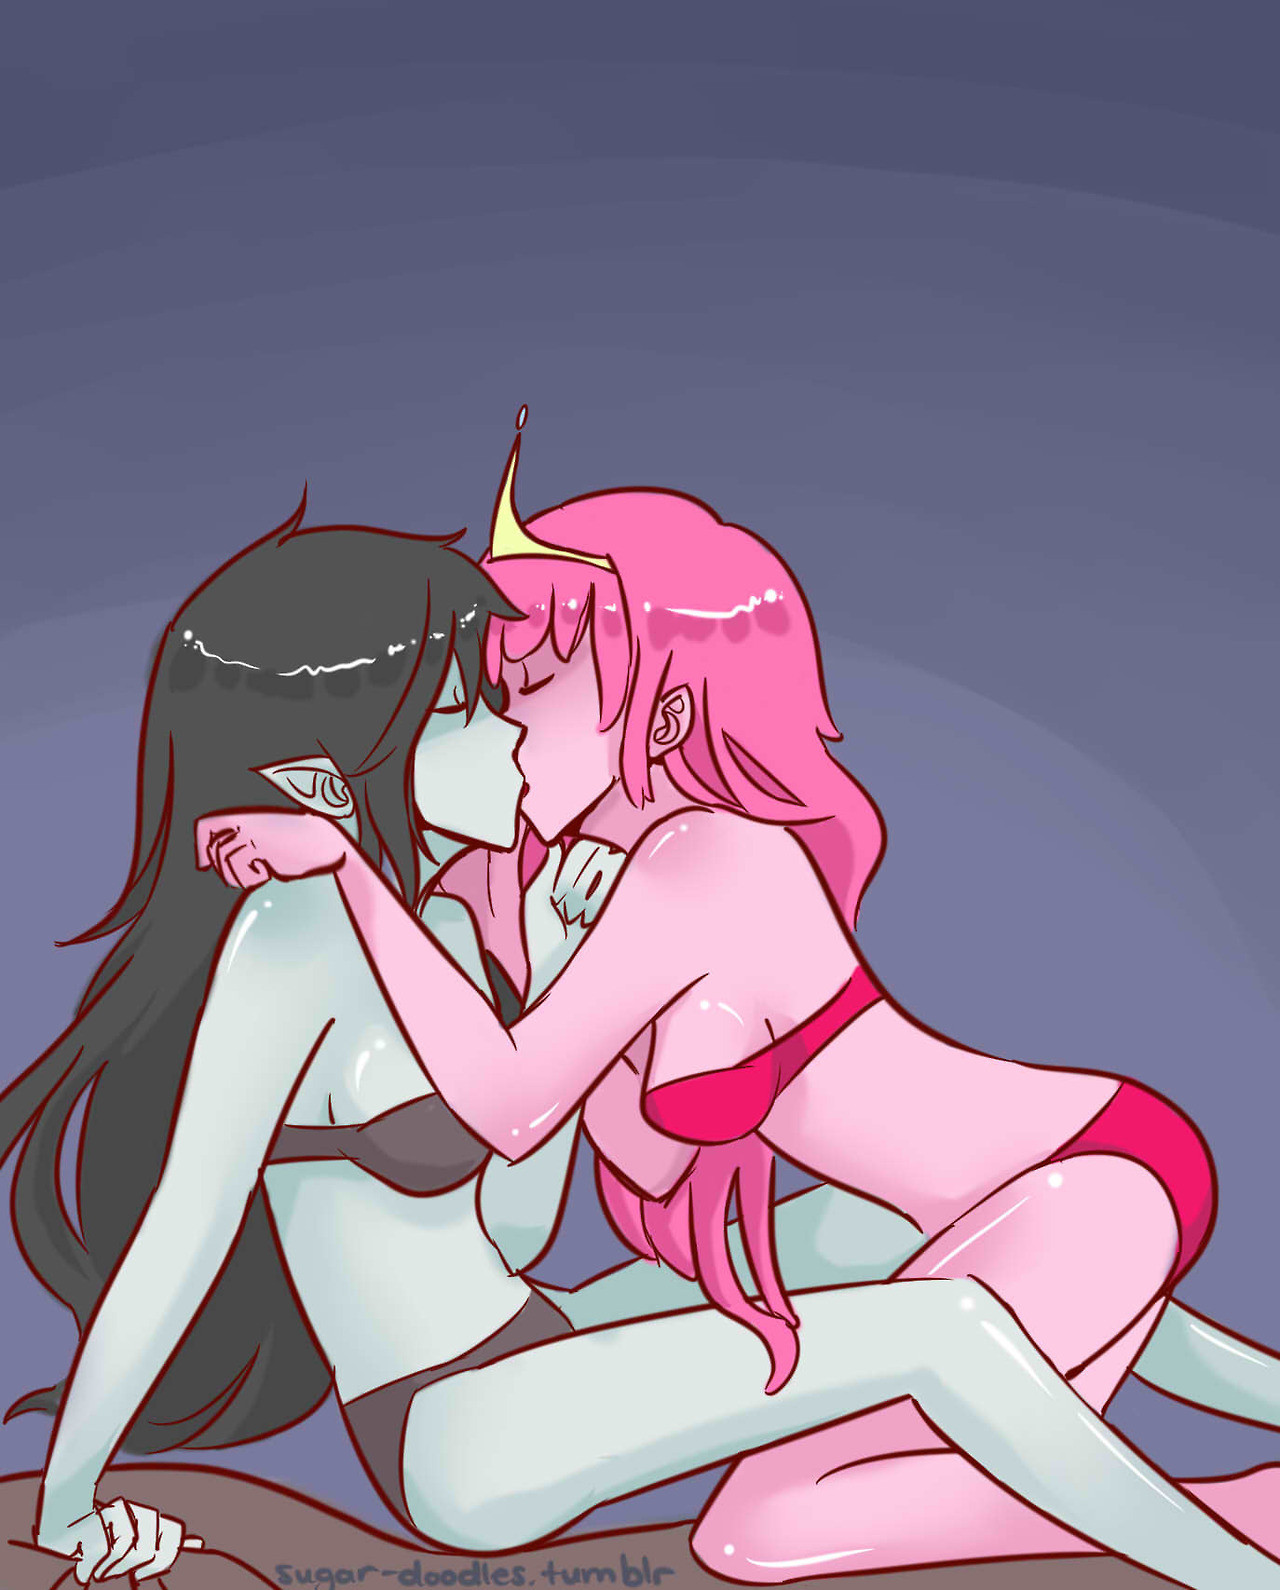 nsfw-lesbian-cartoons-members:  Lesbian Adventure time Request Filled Source: Image